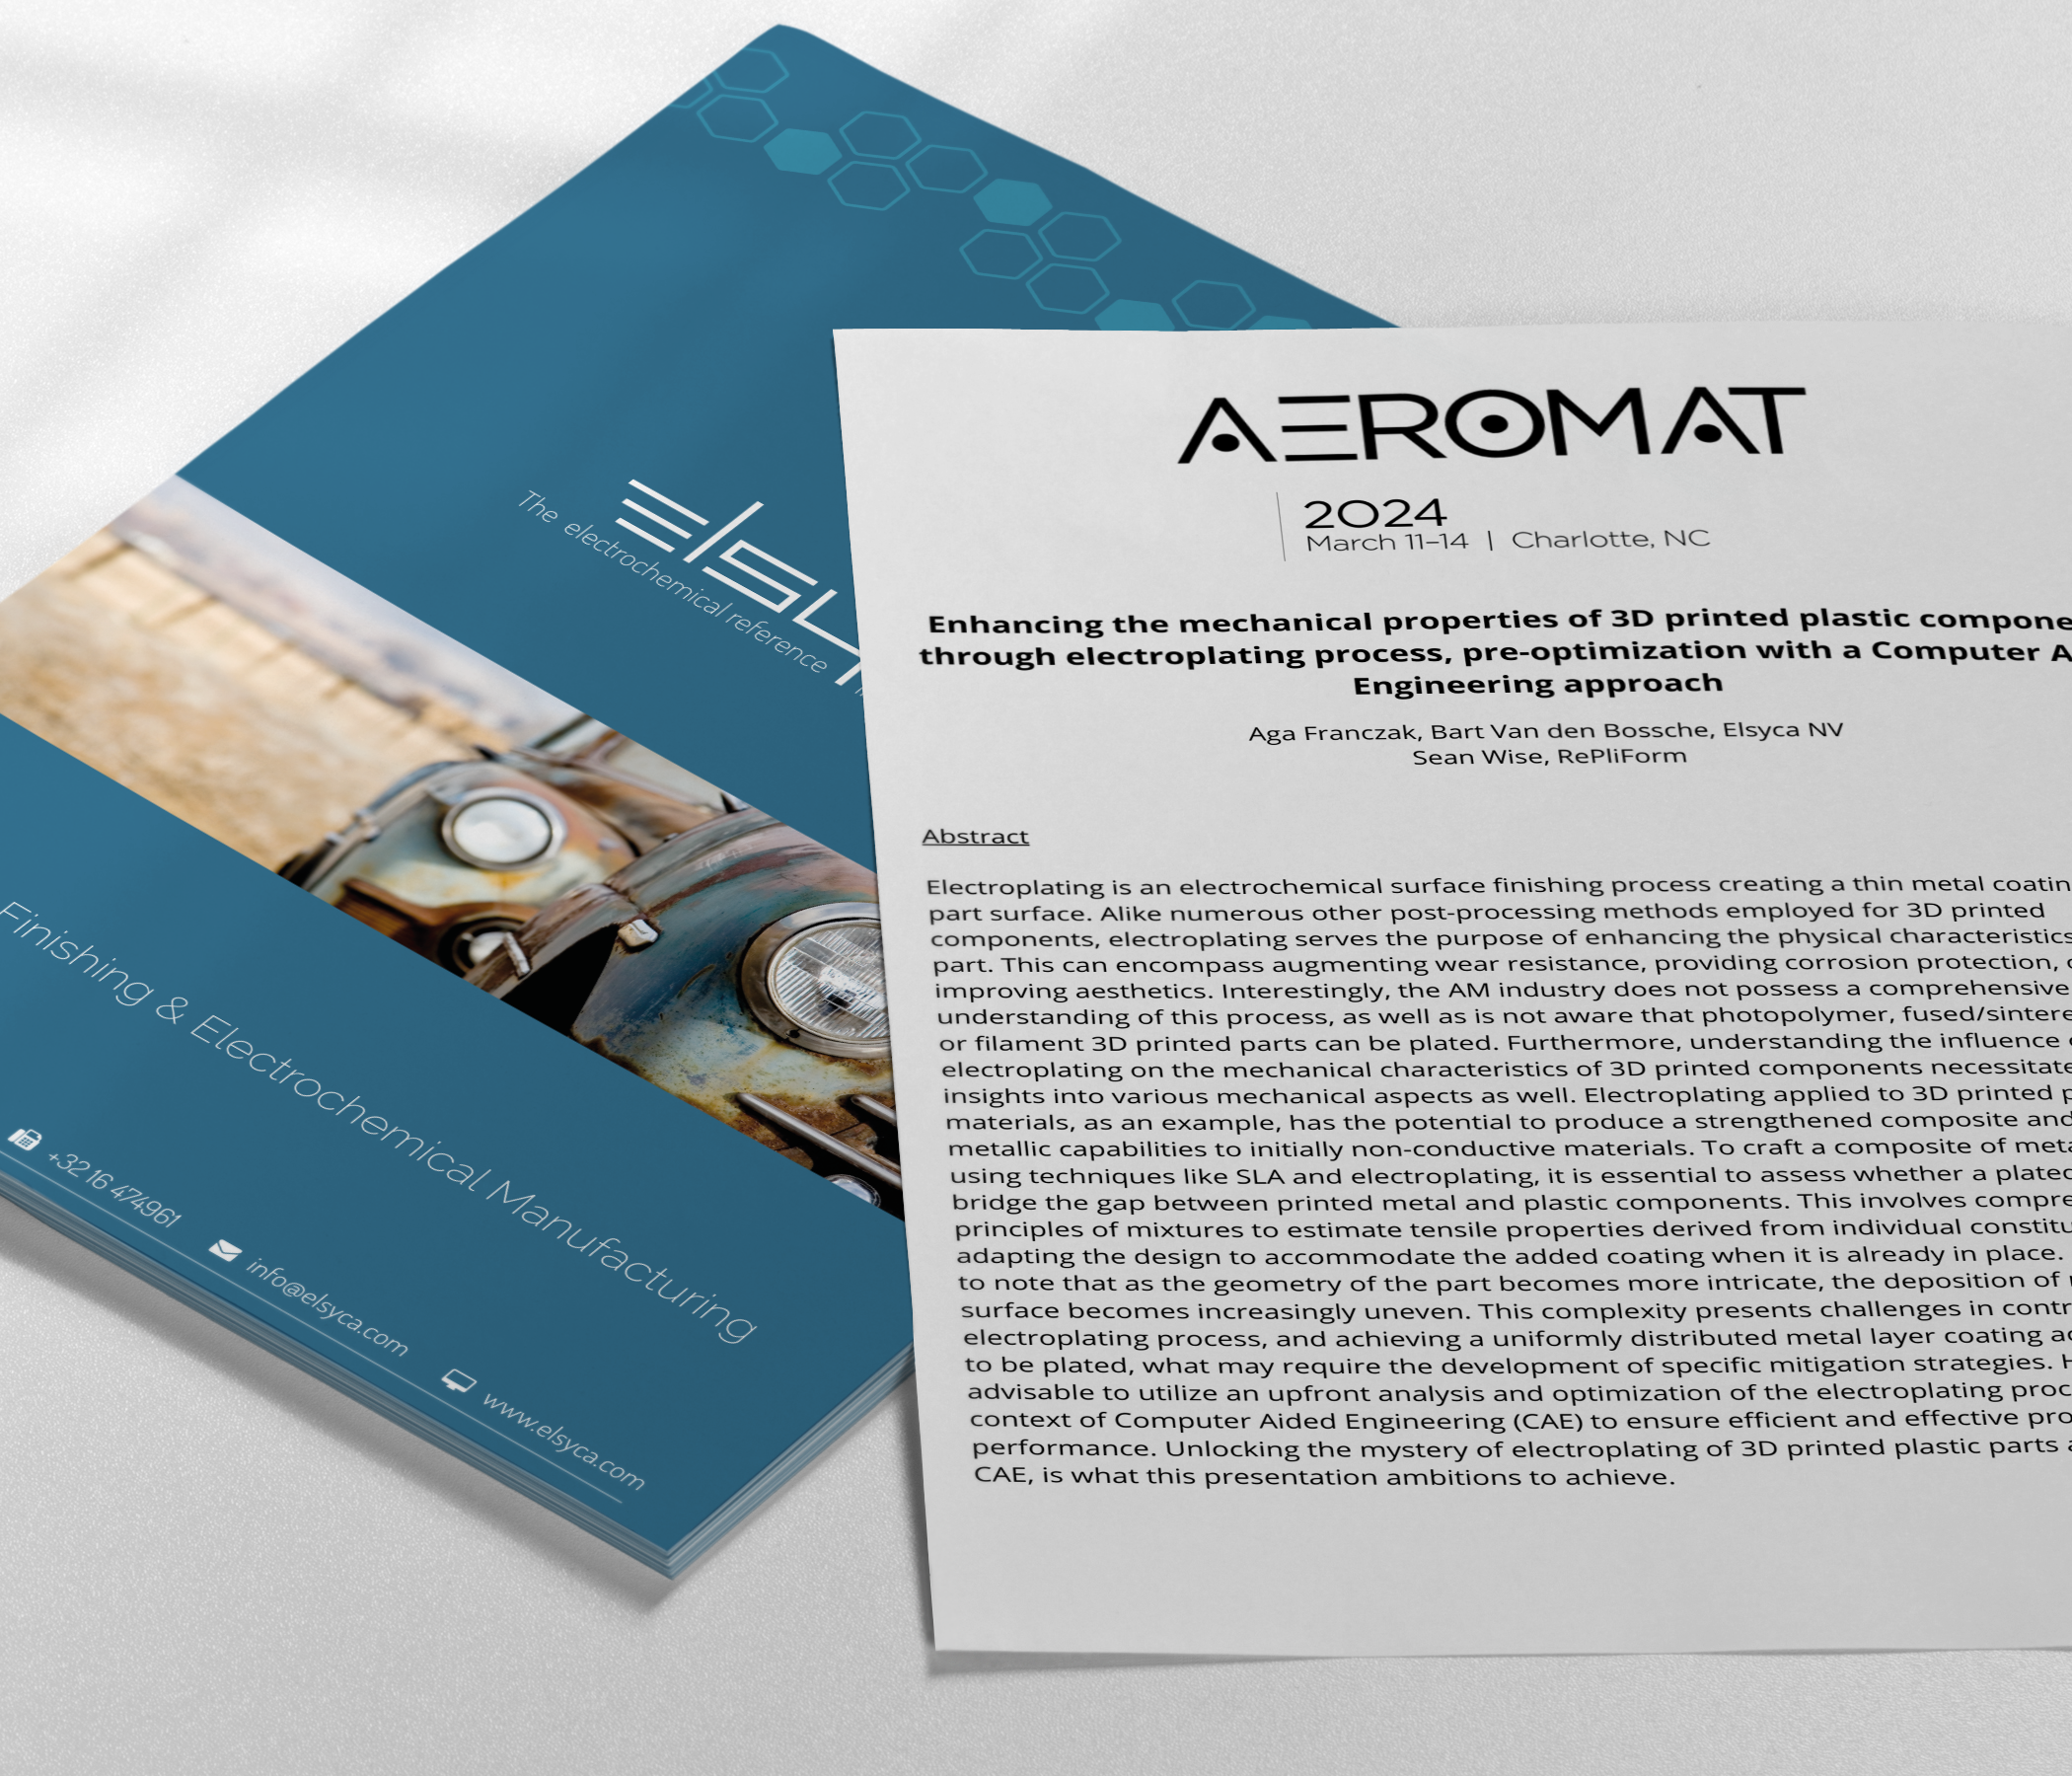 Enhancing the mechanical properties of 3D printed plastic components through electroplating process, pre-optimization with a Computer Aided Engineering approach (AEROMAT 2024)